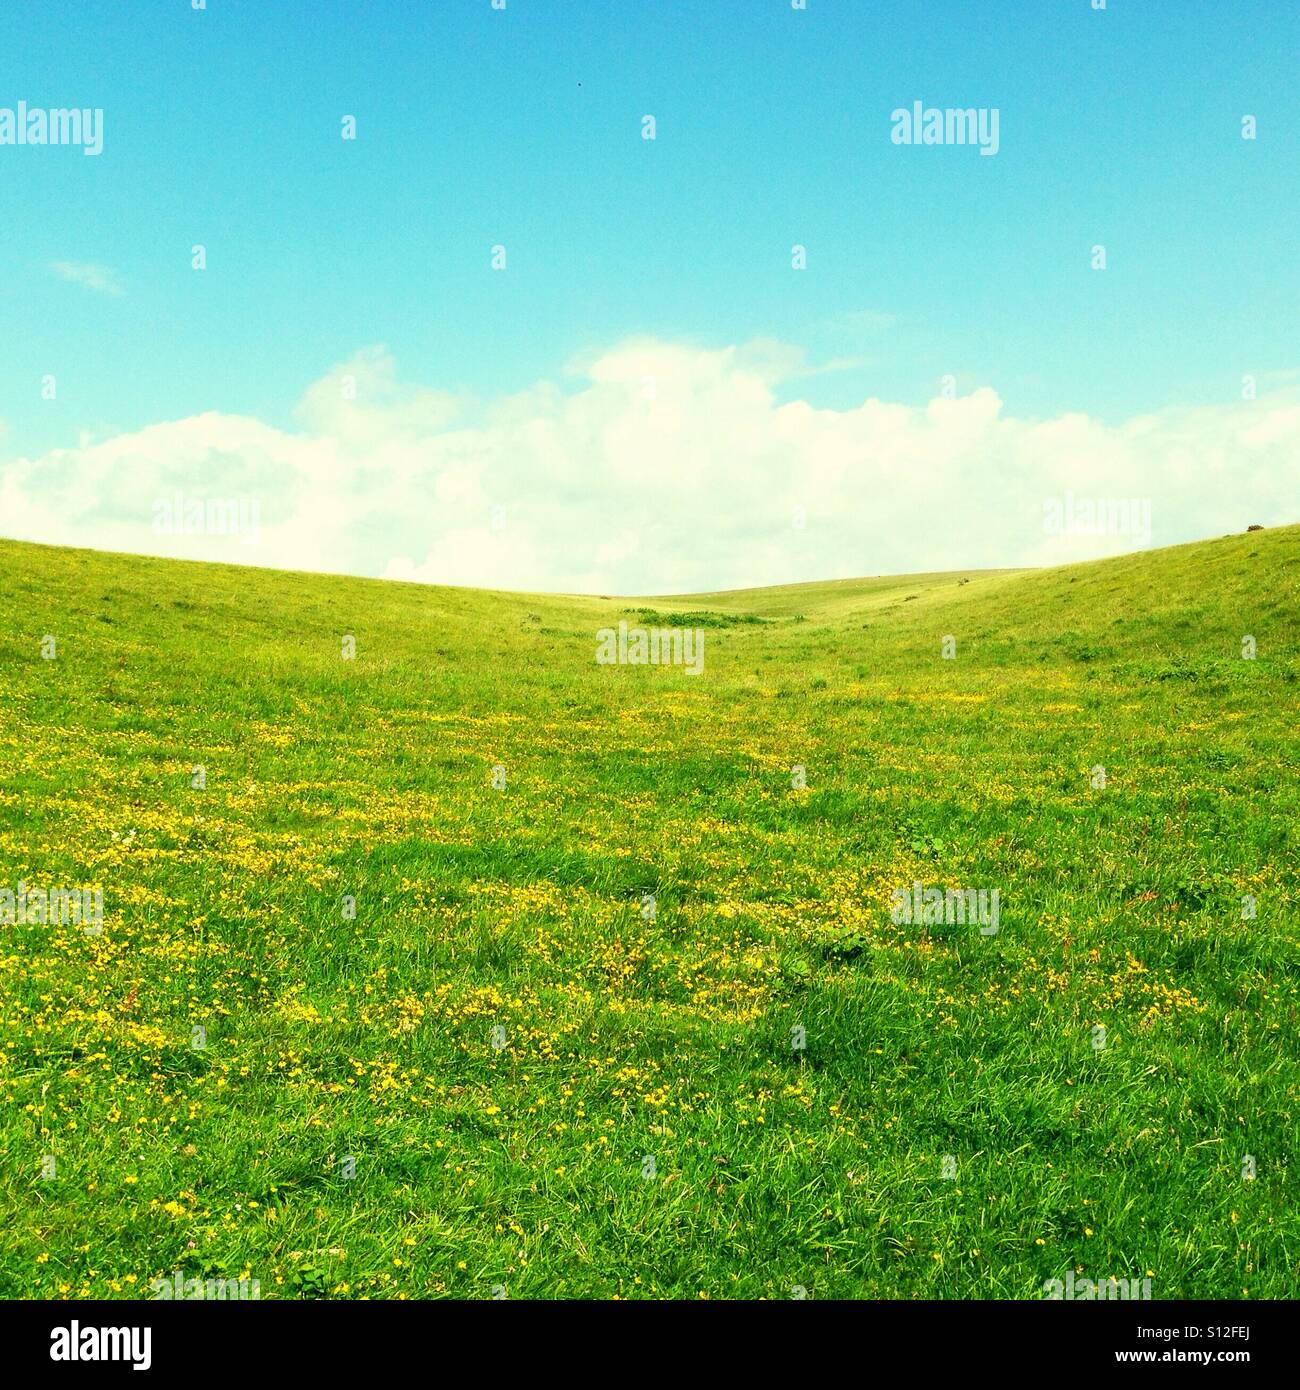 A cloud sandwich - a layer of buttercup spread grass topped with fluffy cloud and blue sky on a summer's day. Stock Photo